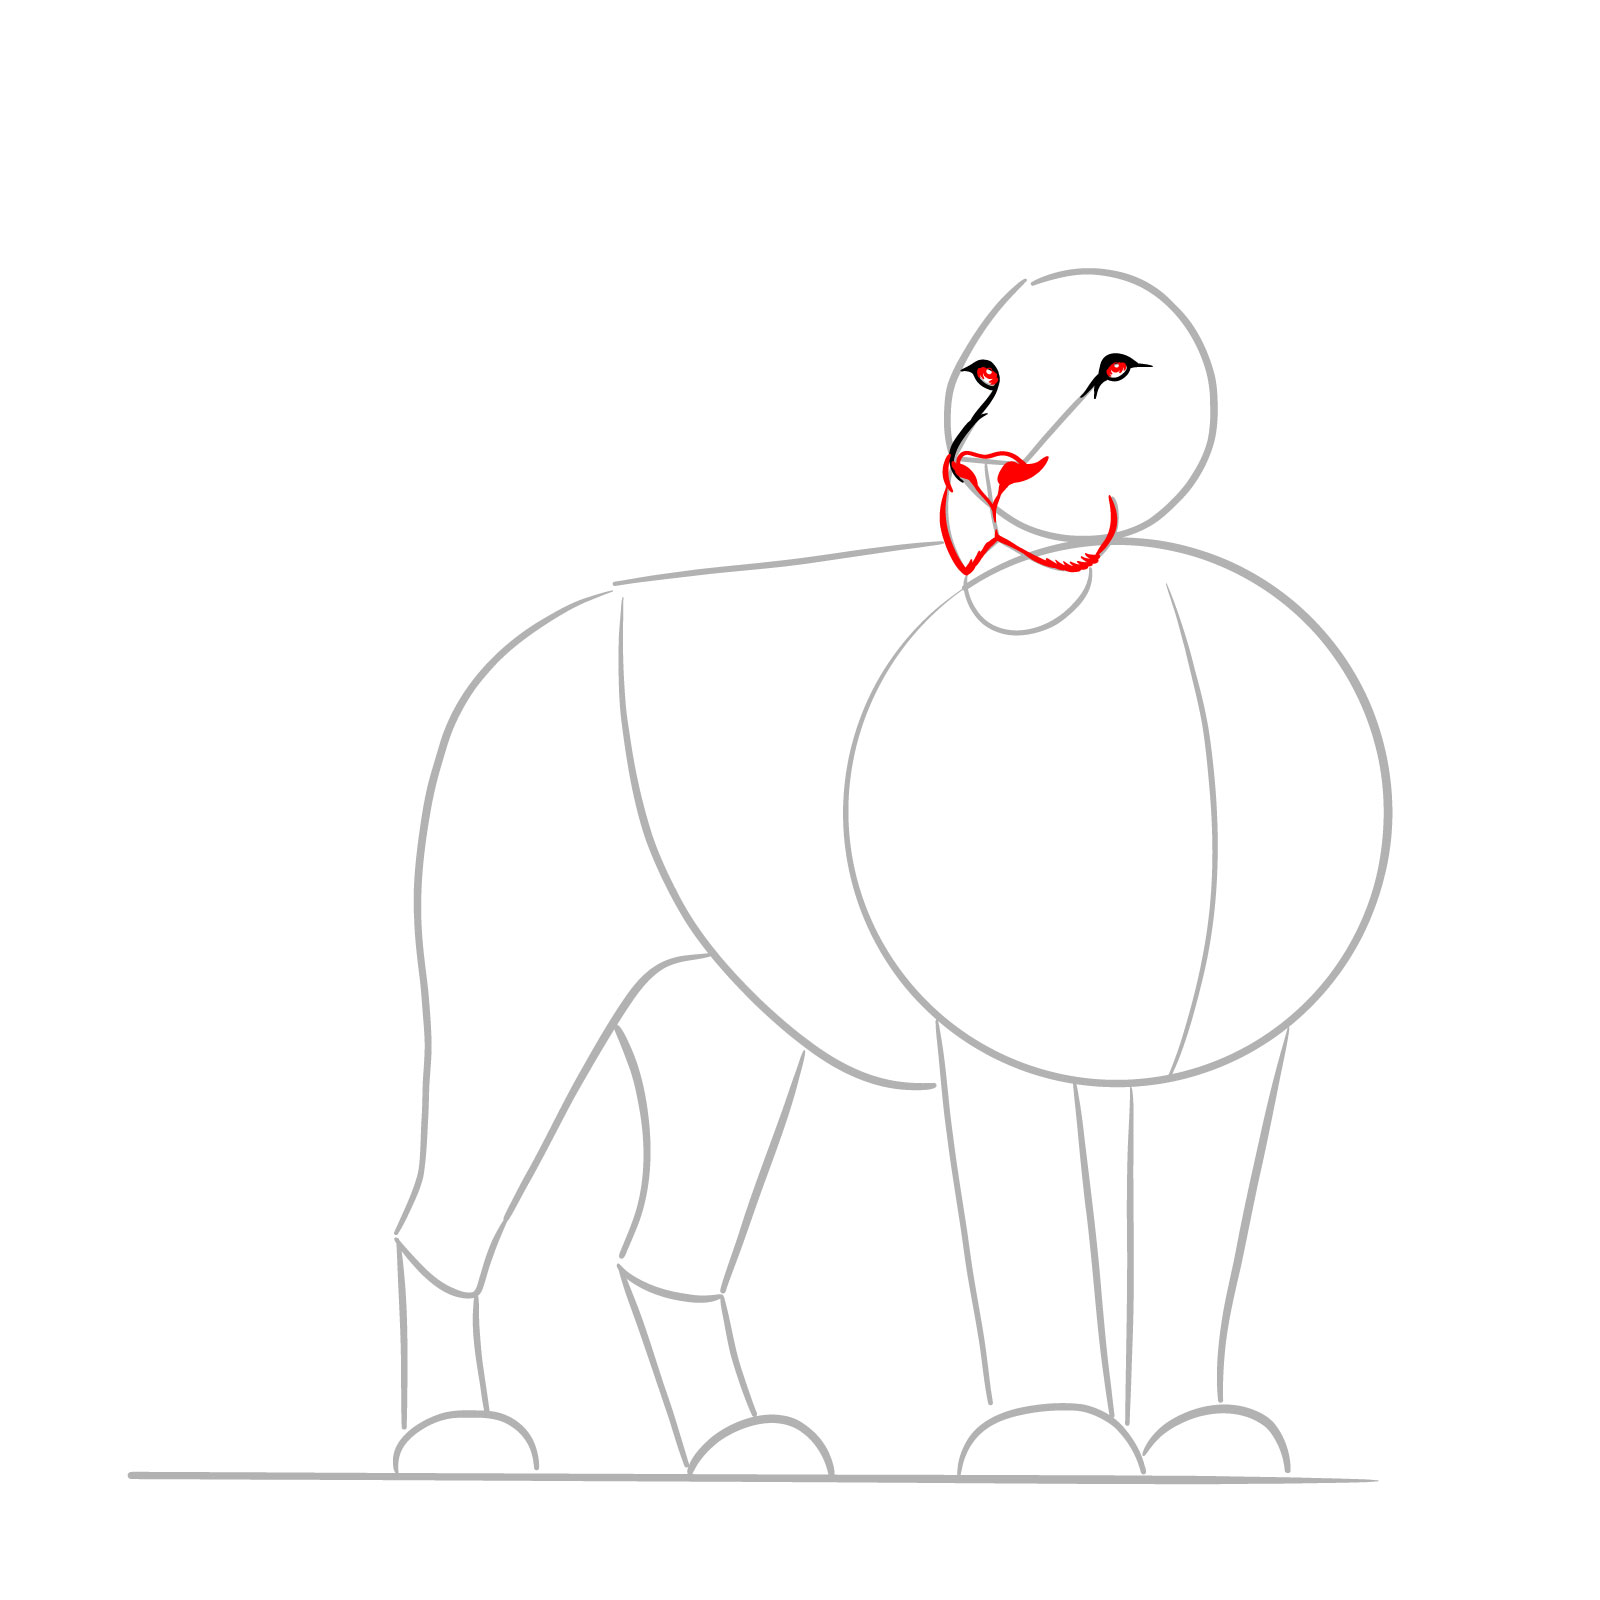 Step in drawing a lion's nose and mouth for a detailed standing lion sketch - step 04